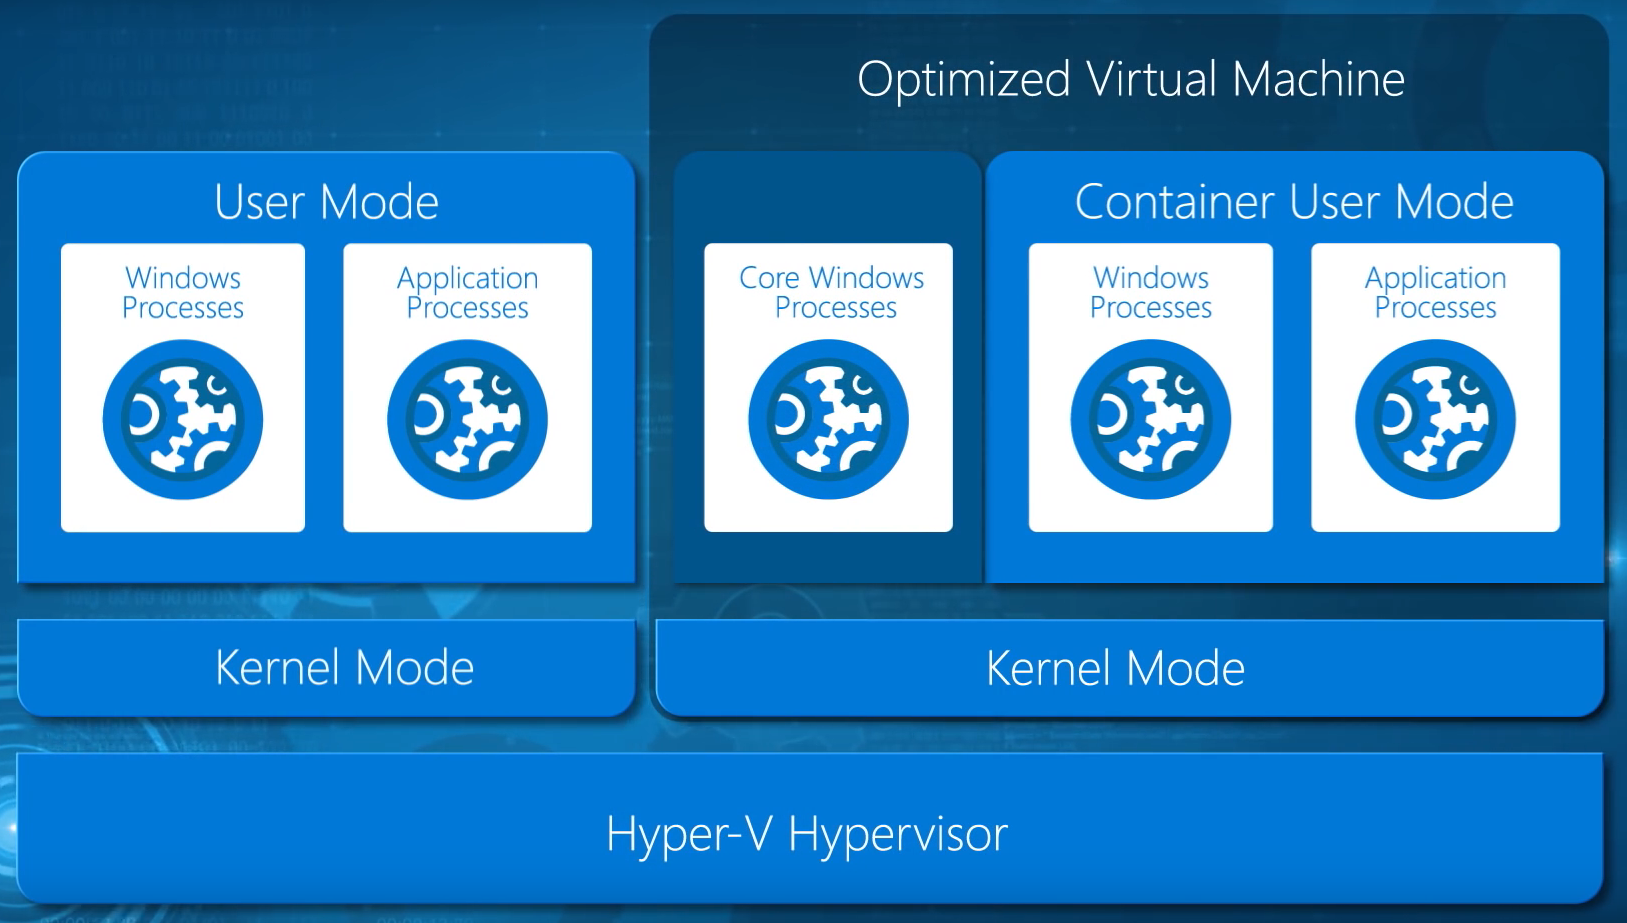 Hyper-V enabling secure isolation between container user modes (Image Credit: Microsoft)